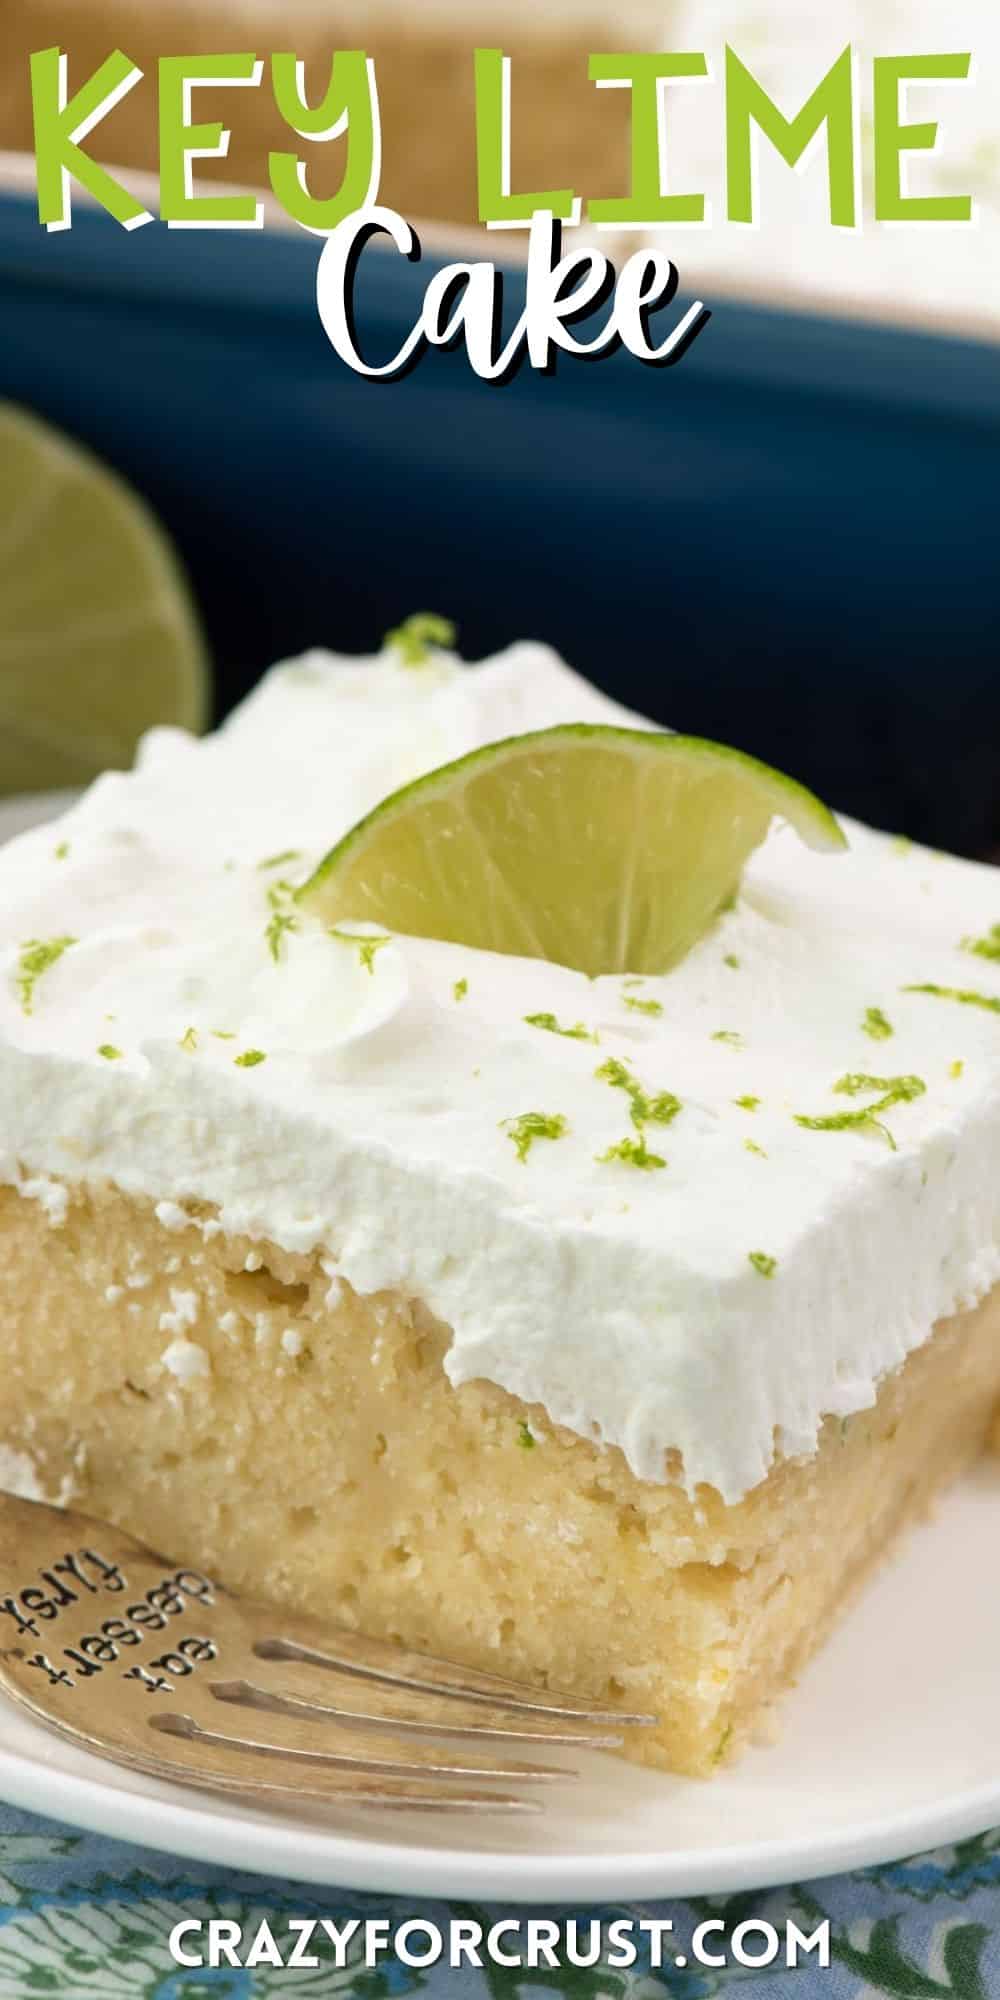 one slice of key lime cake with a sliced lime on top with words on the image.